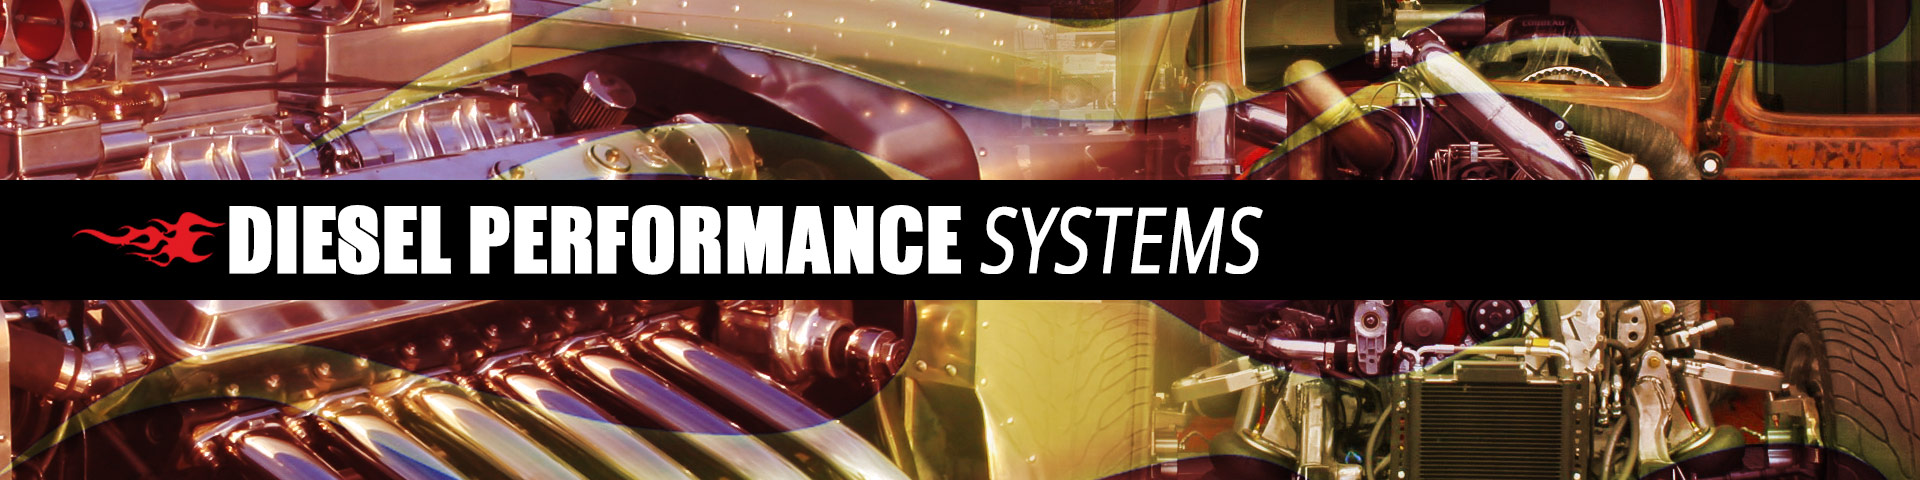 Diesel Performance Systems